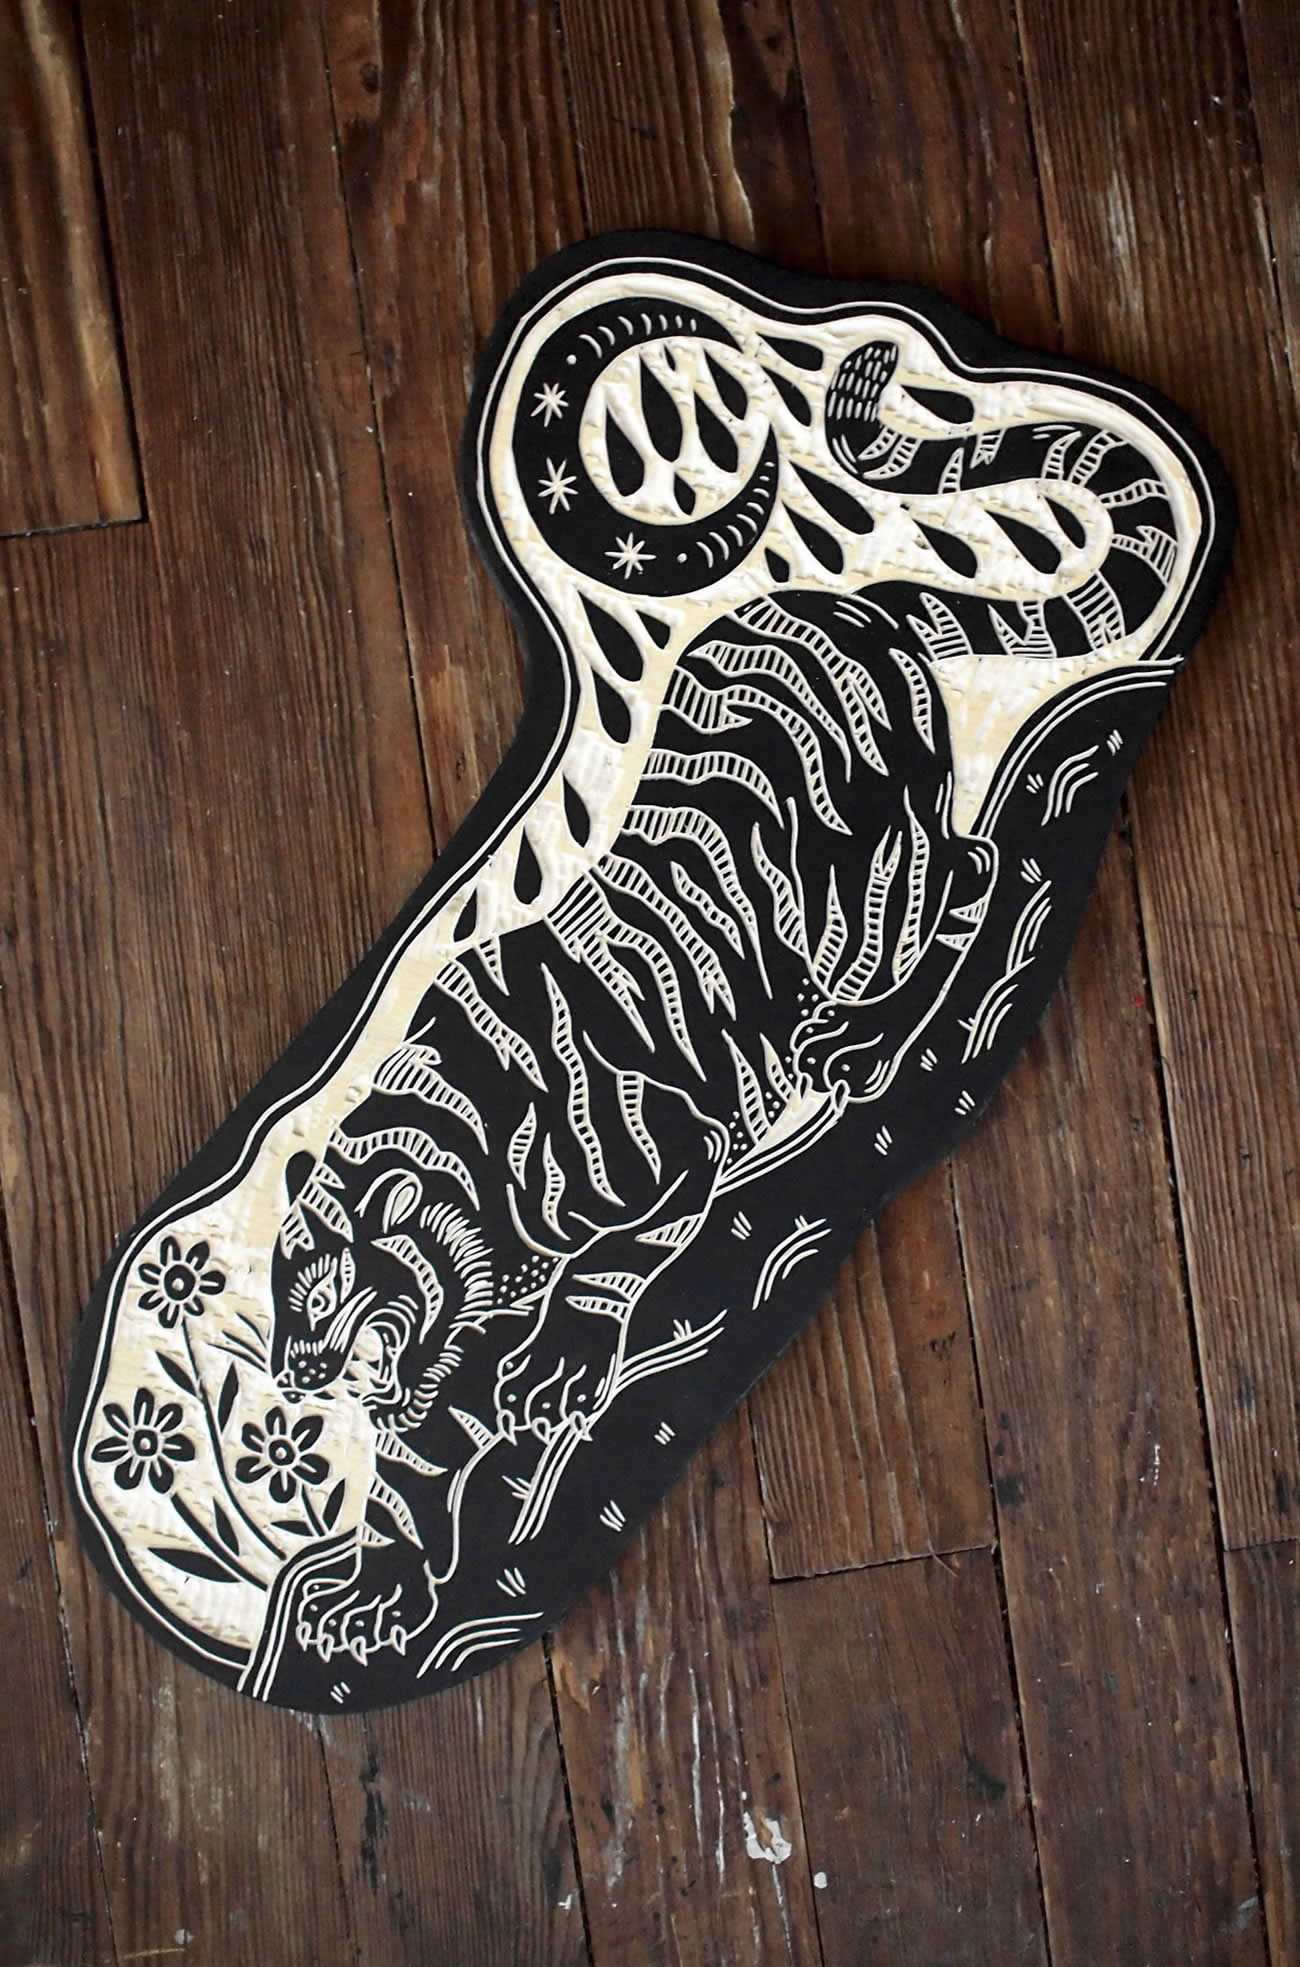 tiger going down, woodcut by bryan perrott 